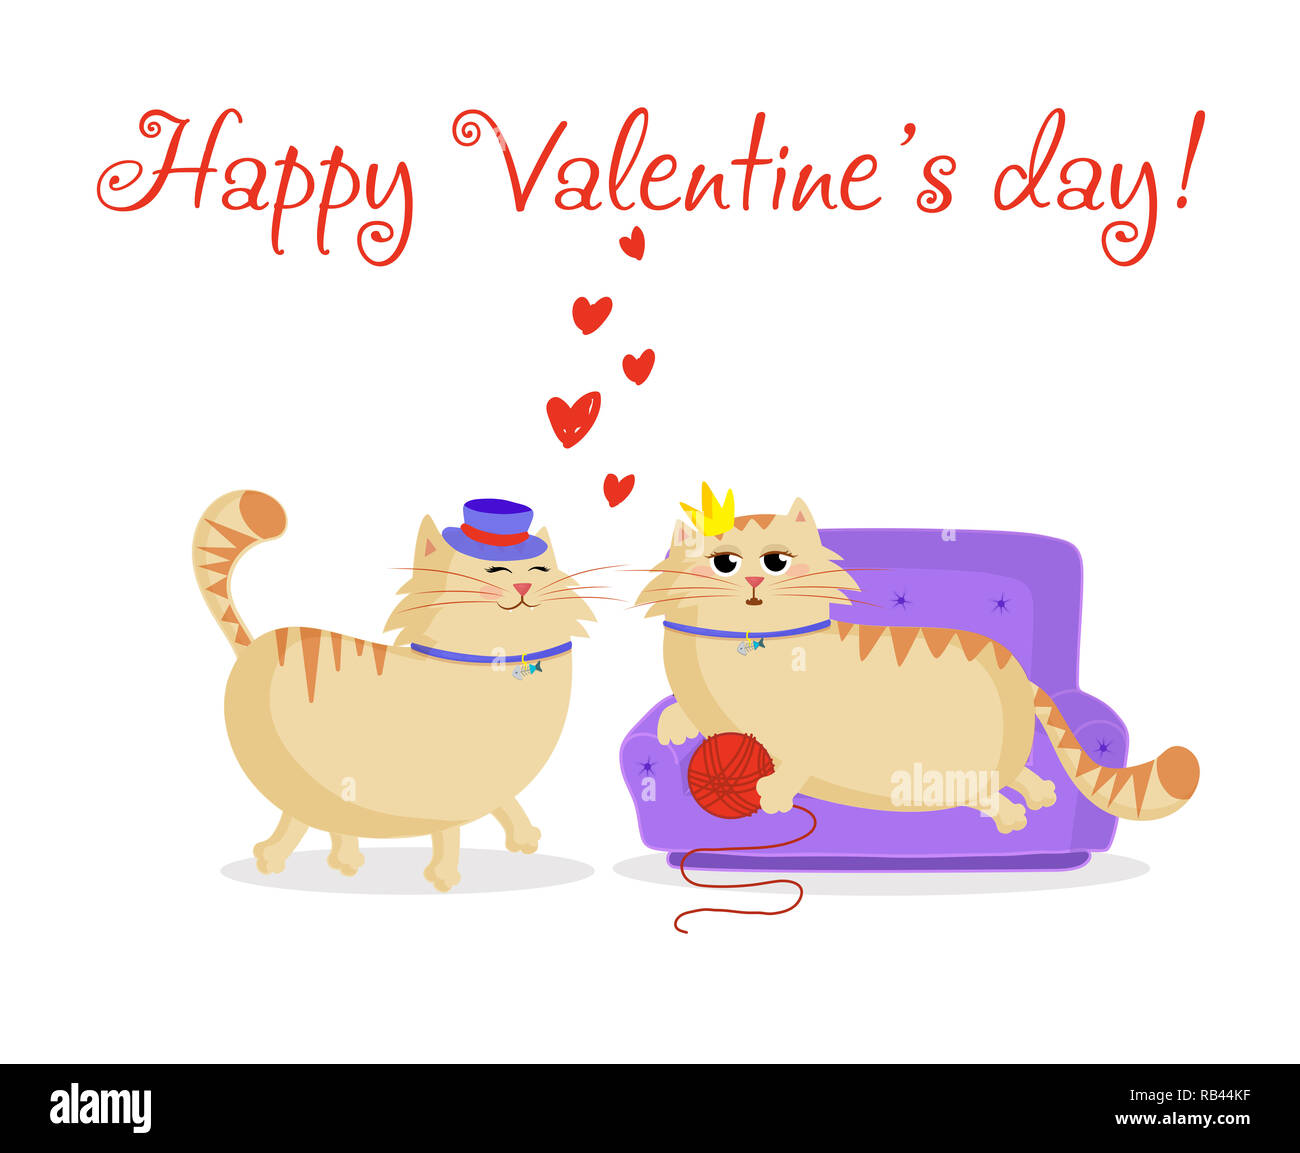 Happy valentines day greeting card with cute cartoon cats boy and girl in  love. Male cat in top hat and female princess cat on the sofa with ball.  Val Stock Photo -